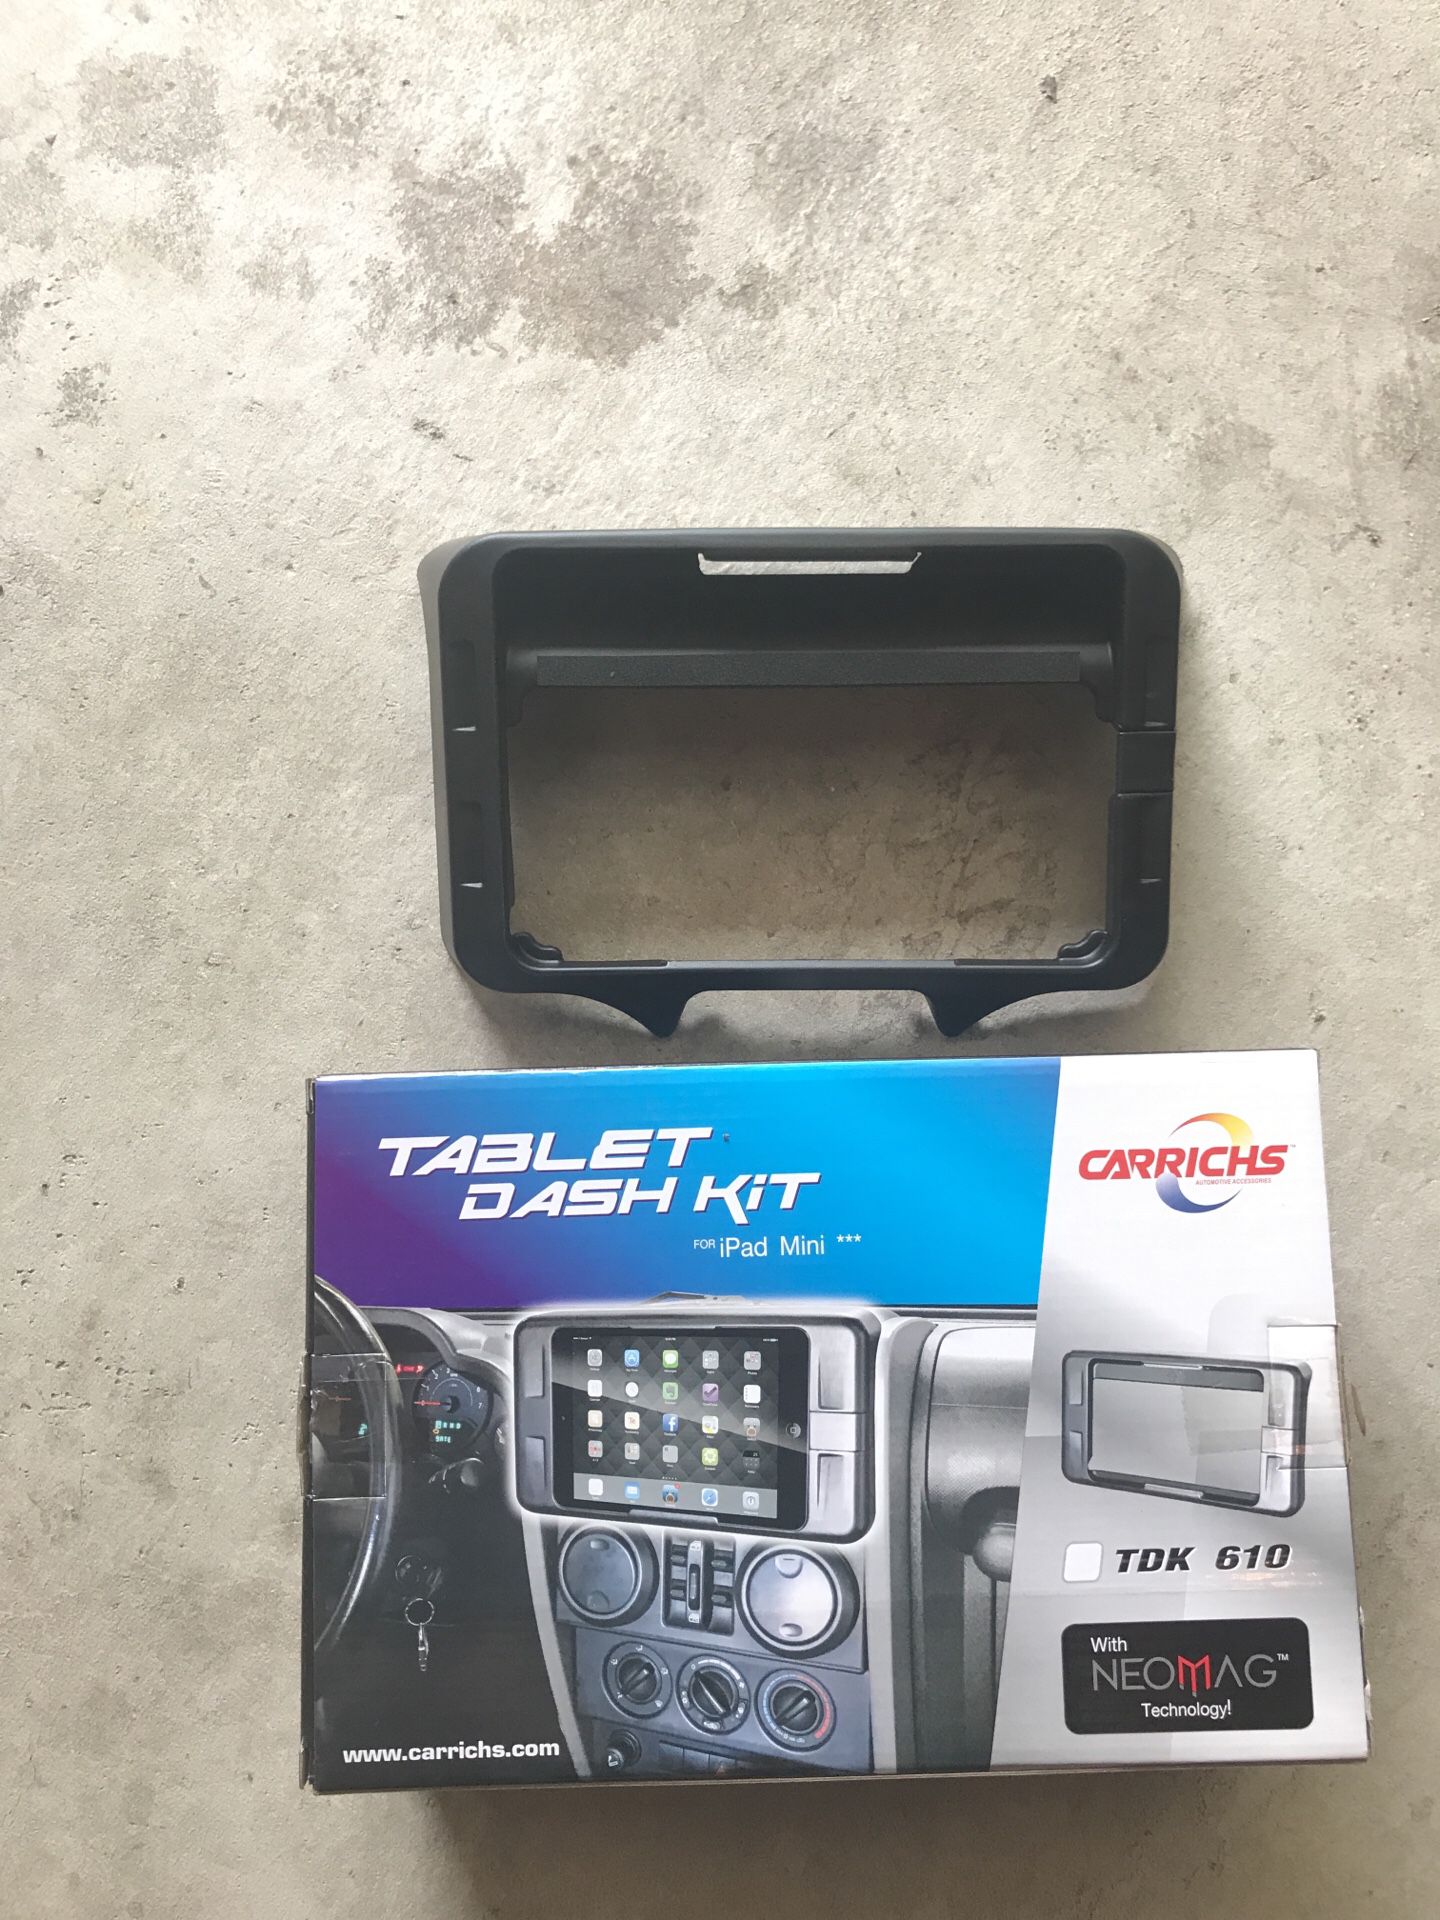 Jeep Wrangler iPad dash kit for Sale in Chicago, IL - OfferUp